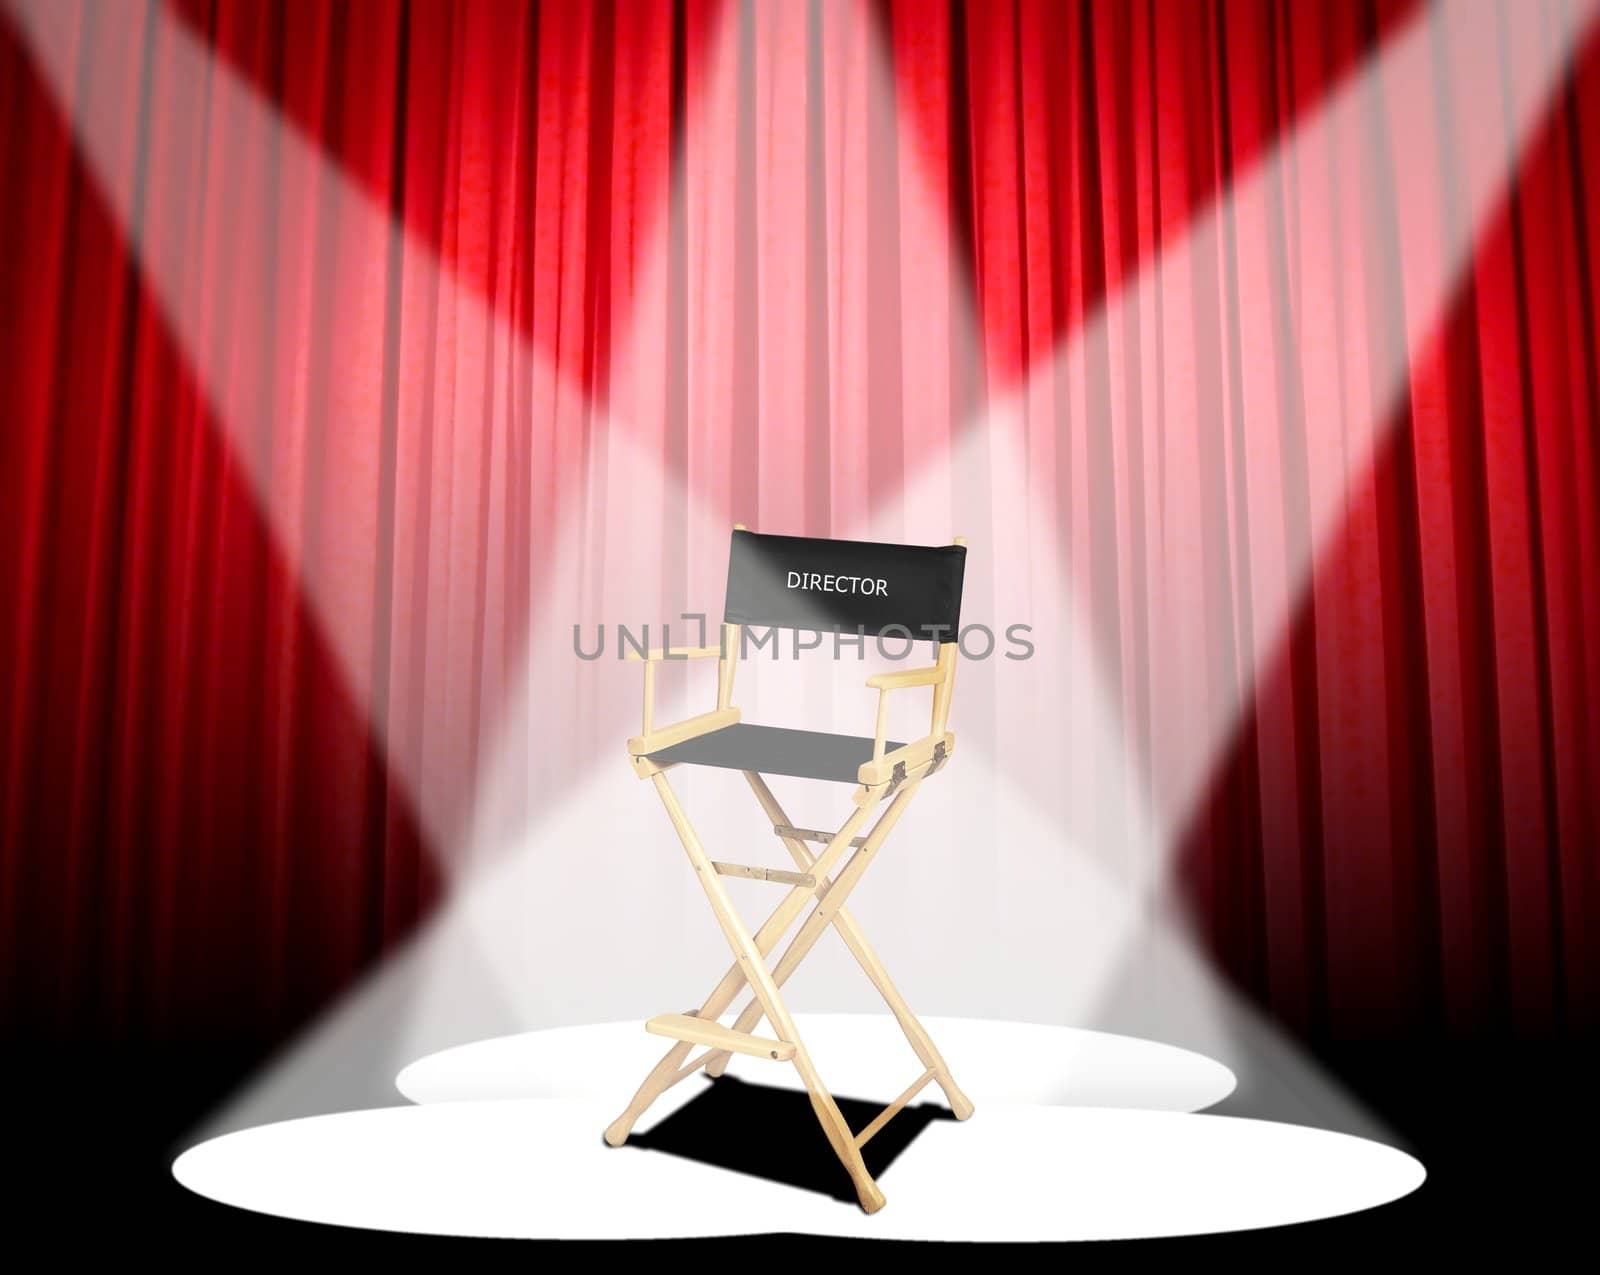 Director's chair over red curtain